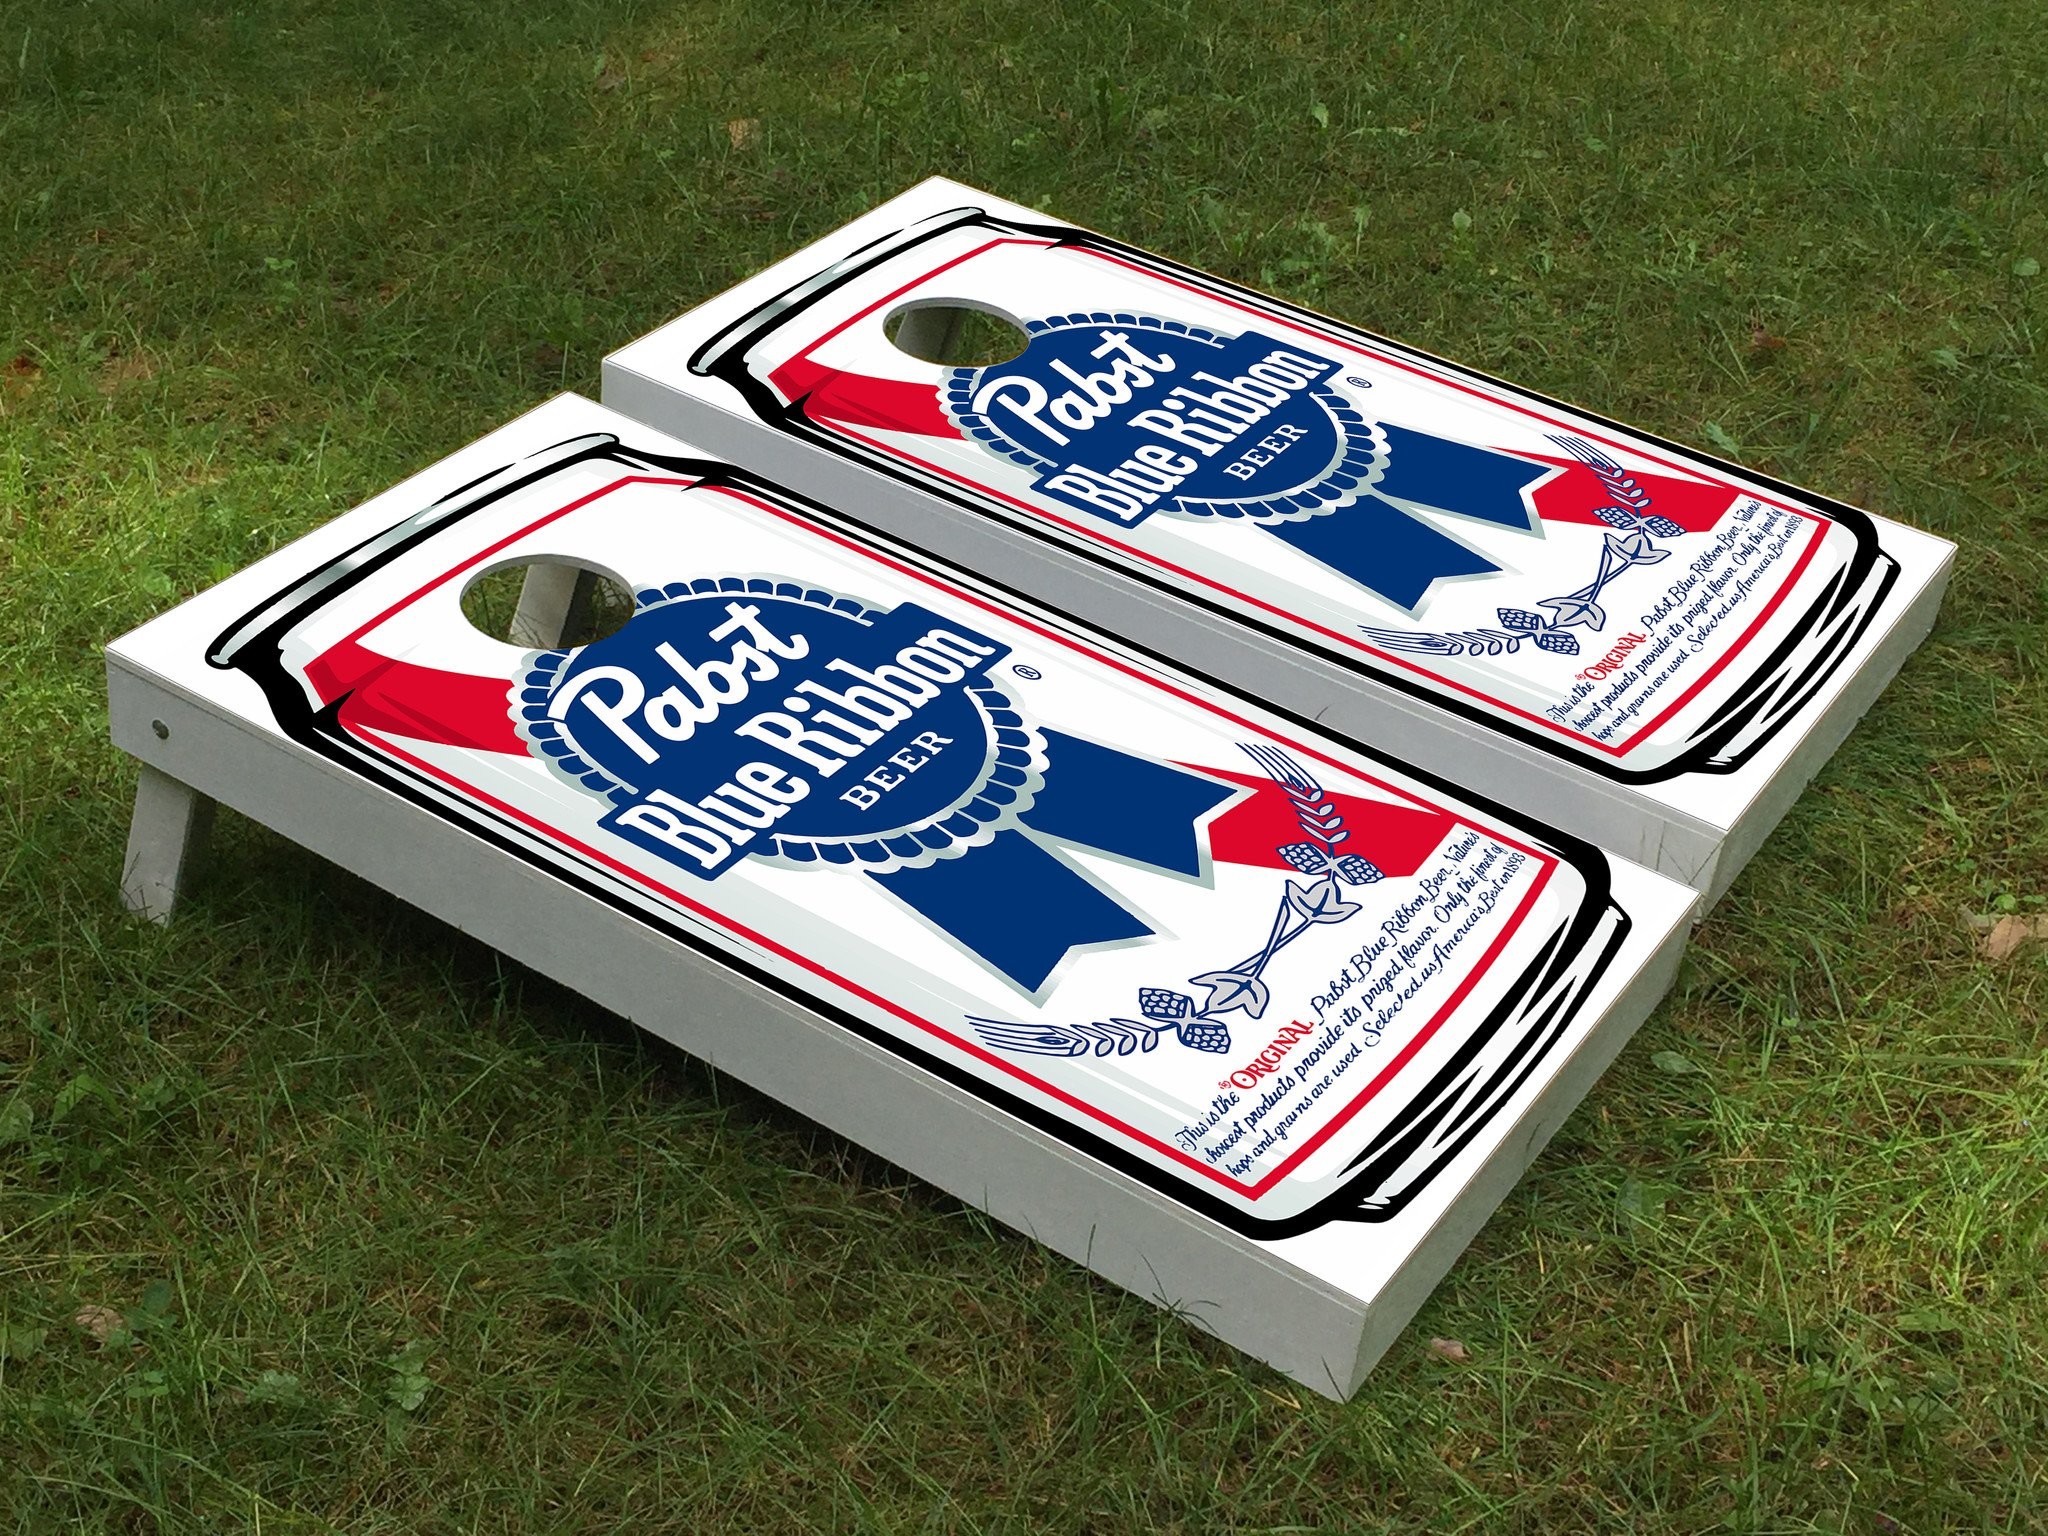 2048x1536 PBR Pabst Blue Ribbon Beer Can Cornhole Boards